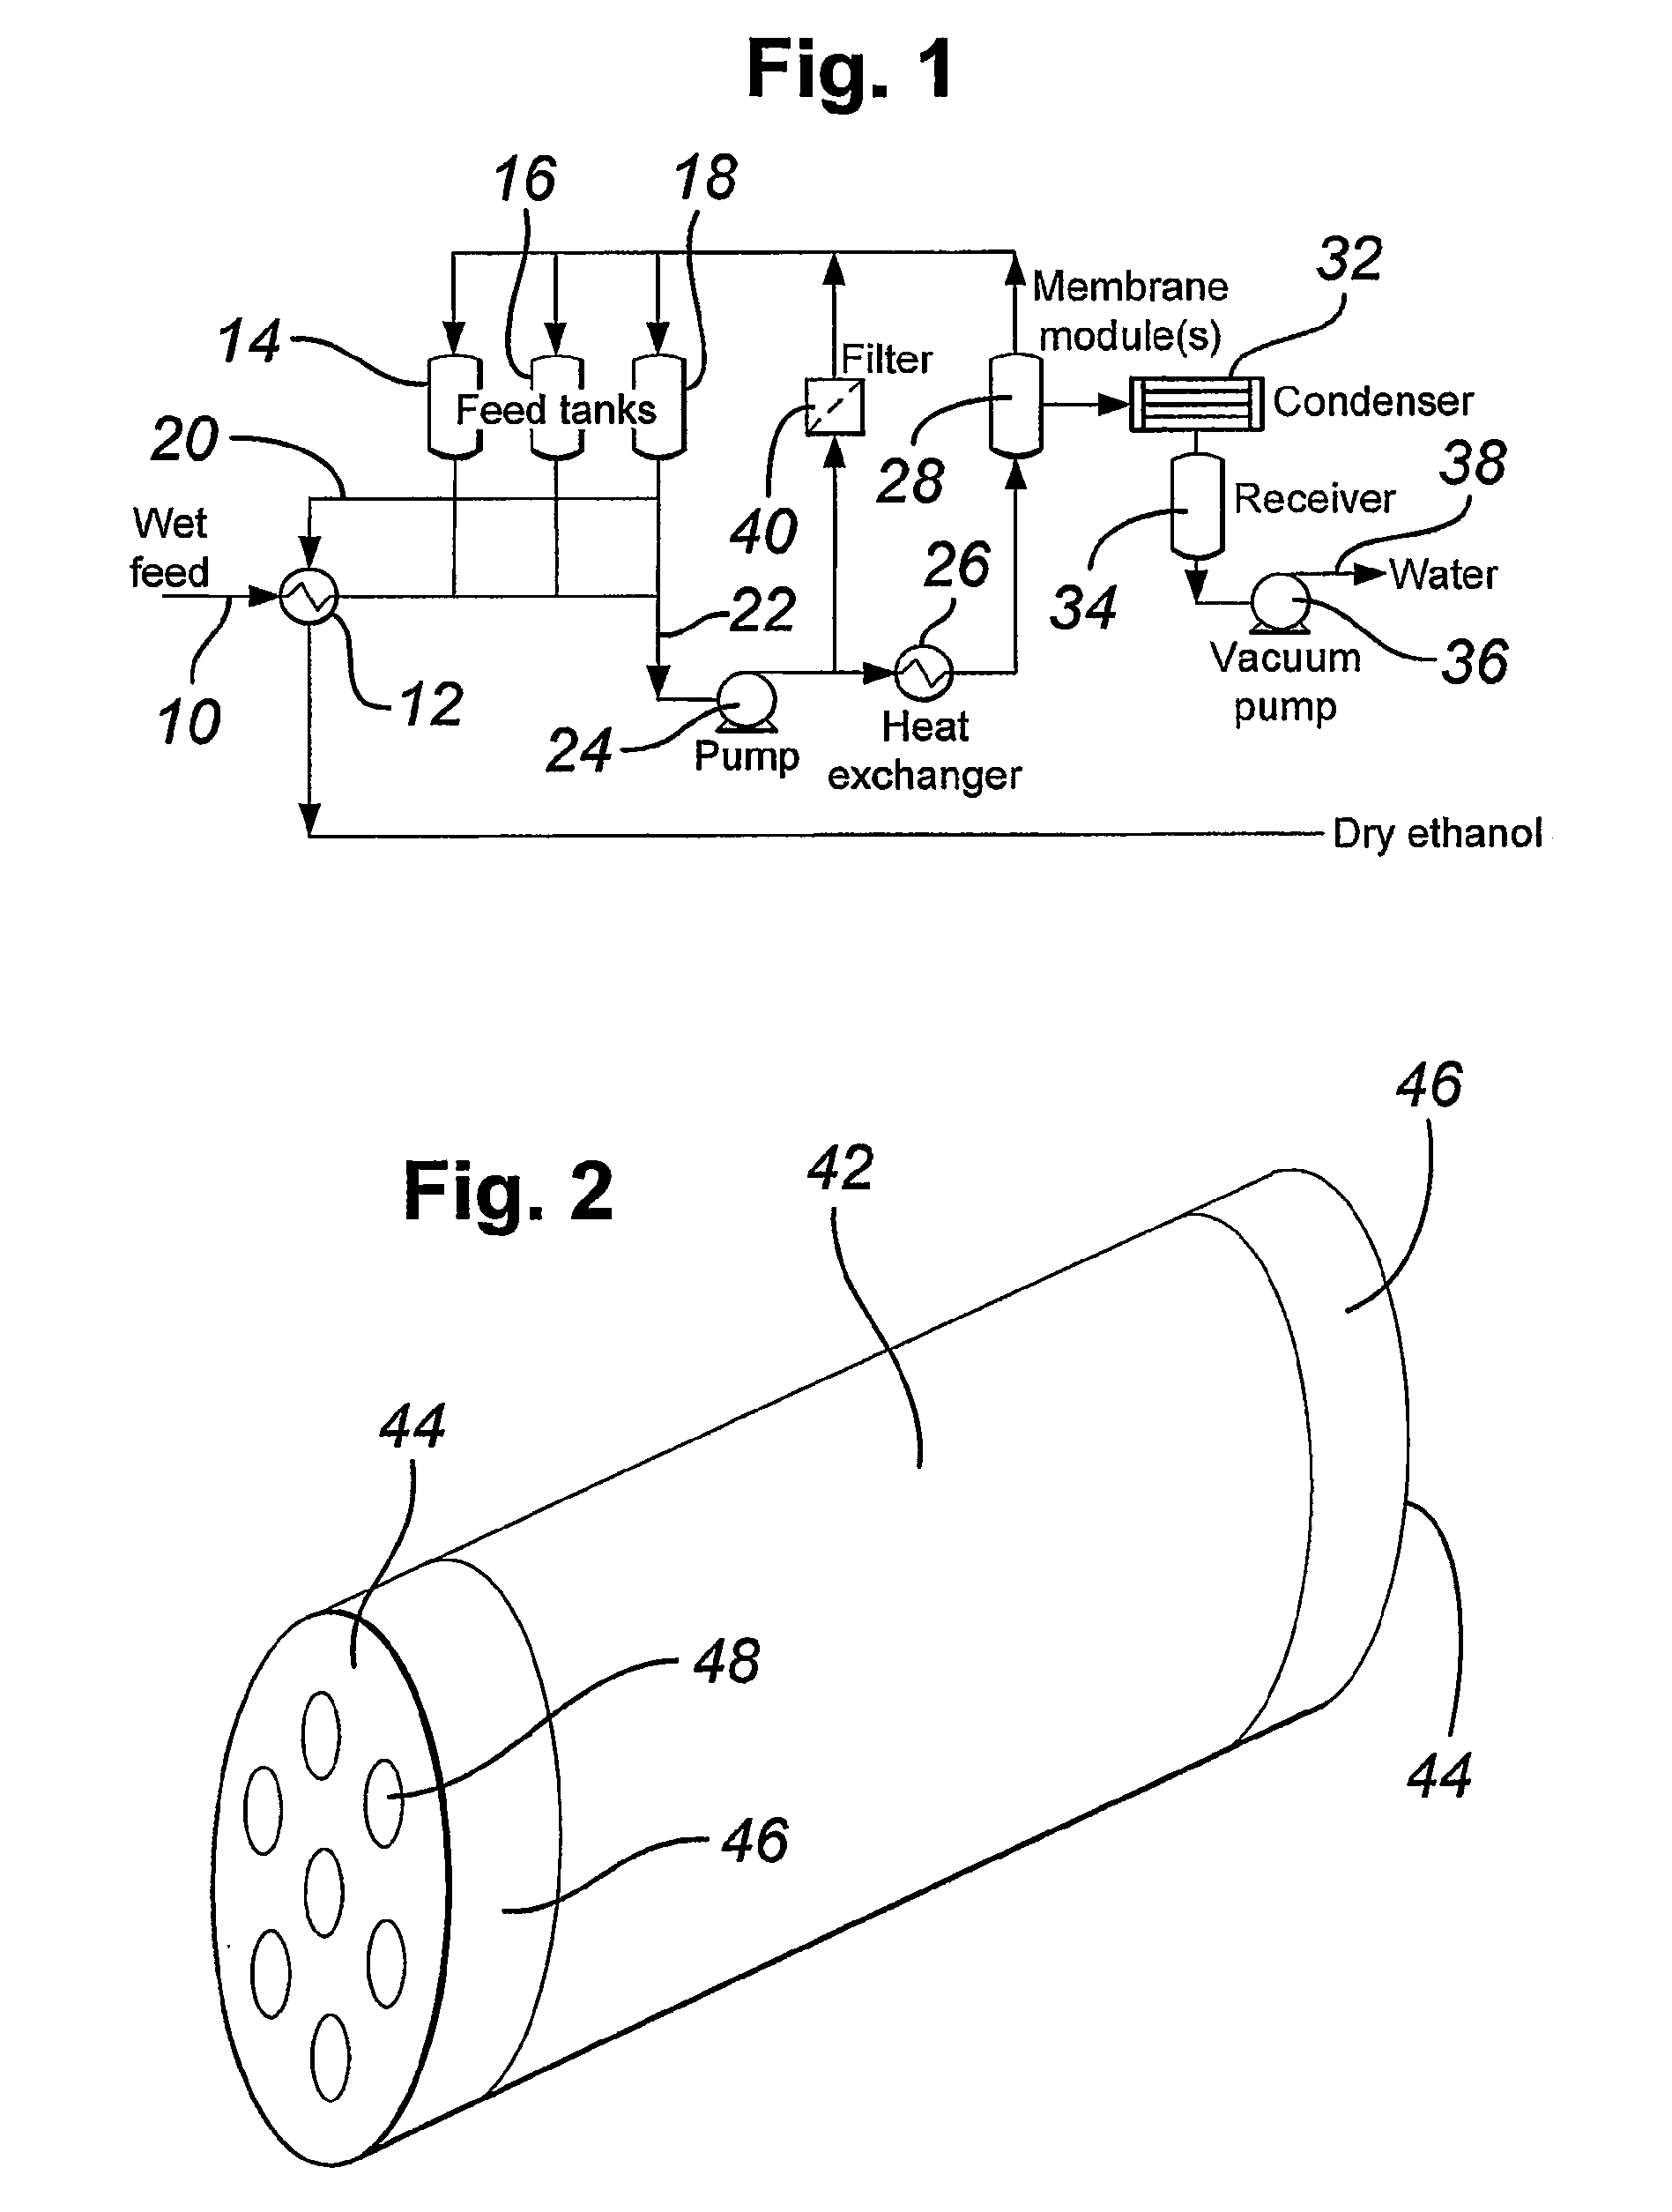 Process and apparatus for treatment of organic solvents